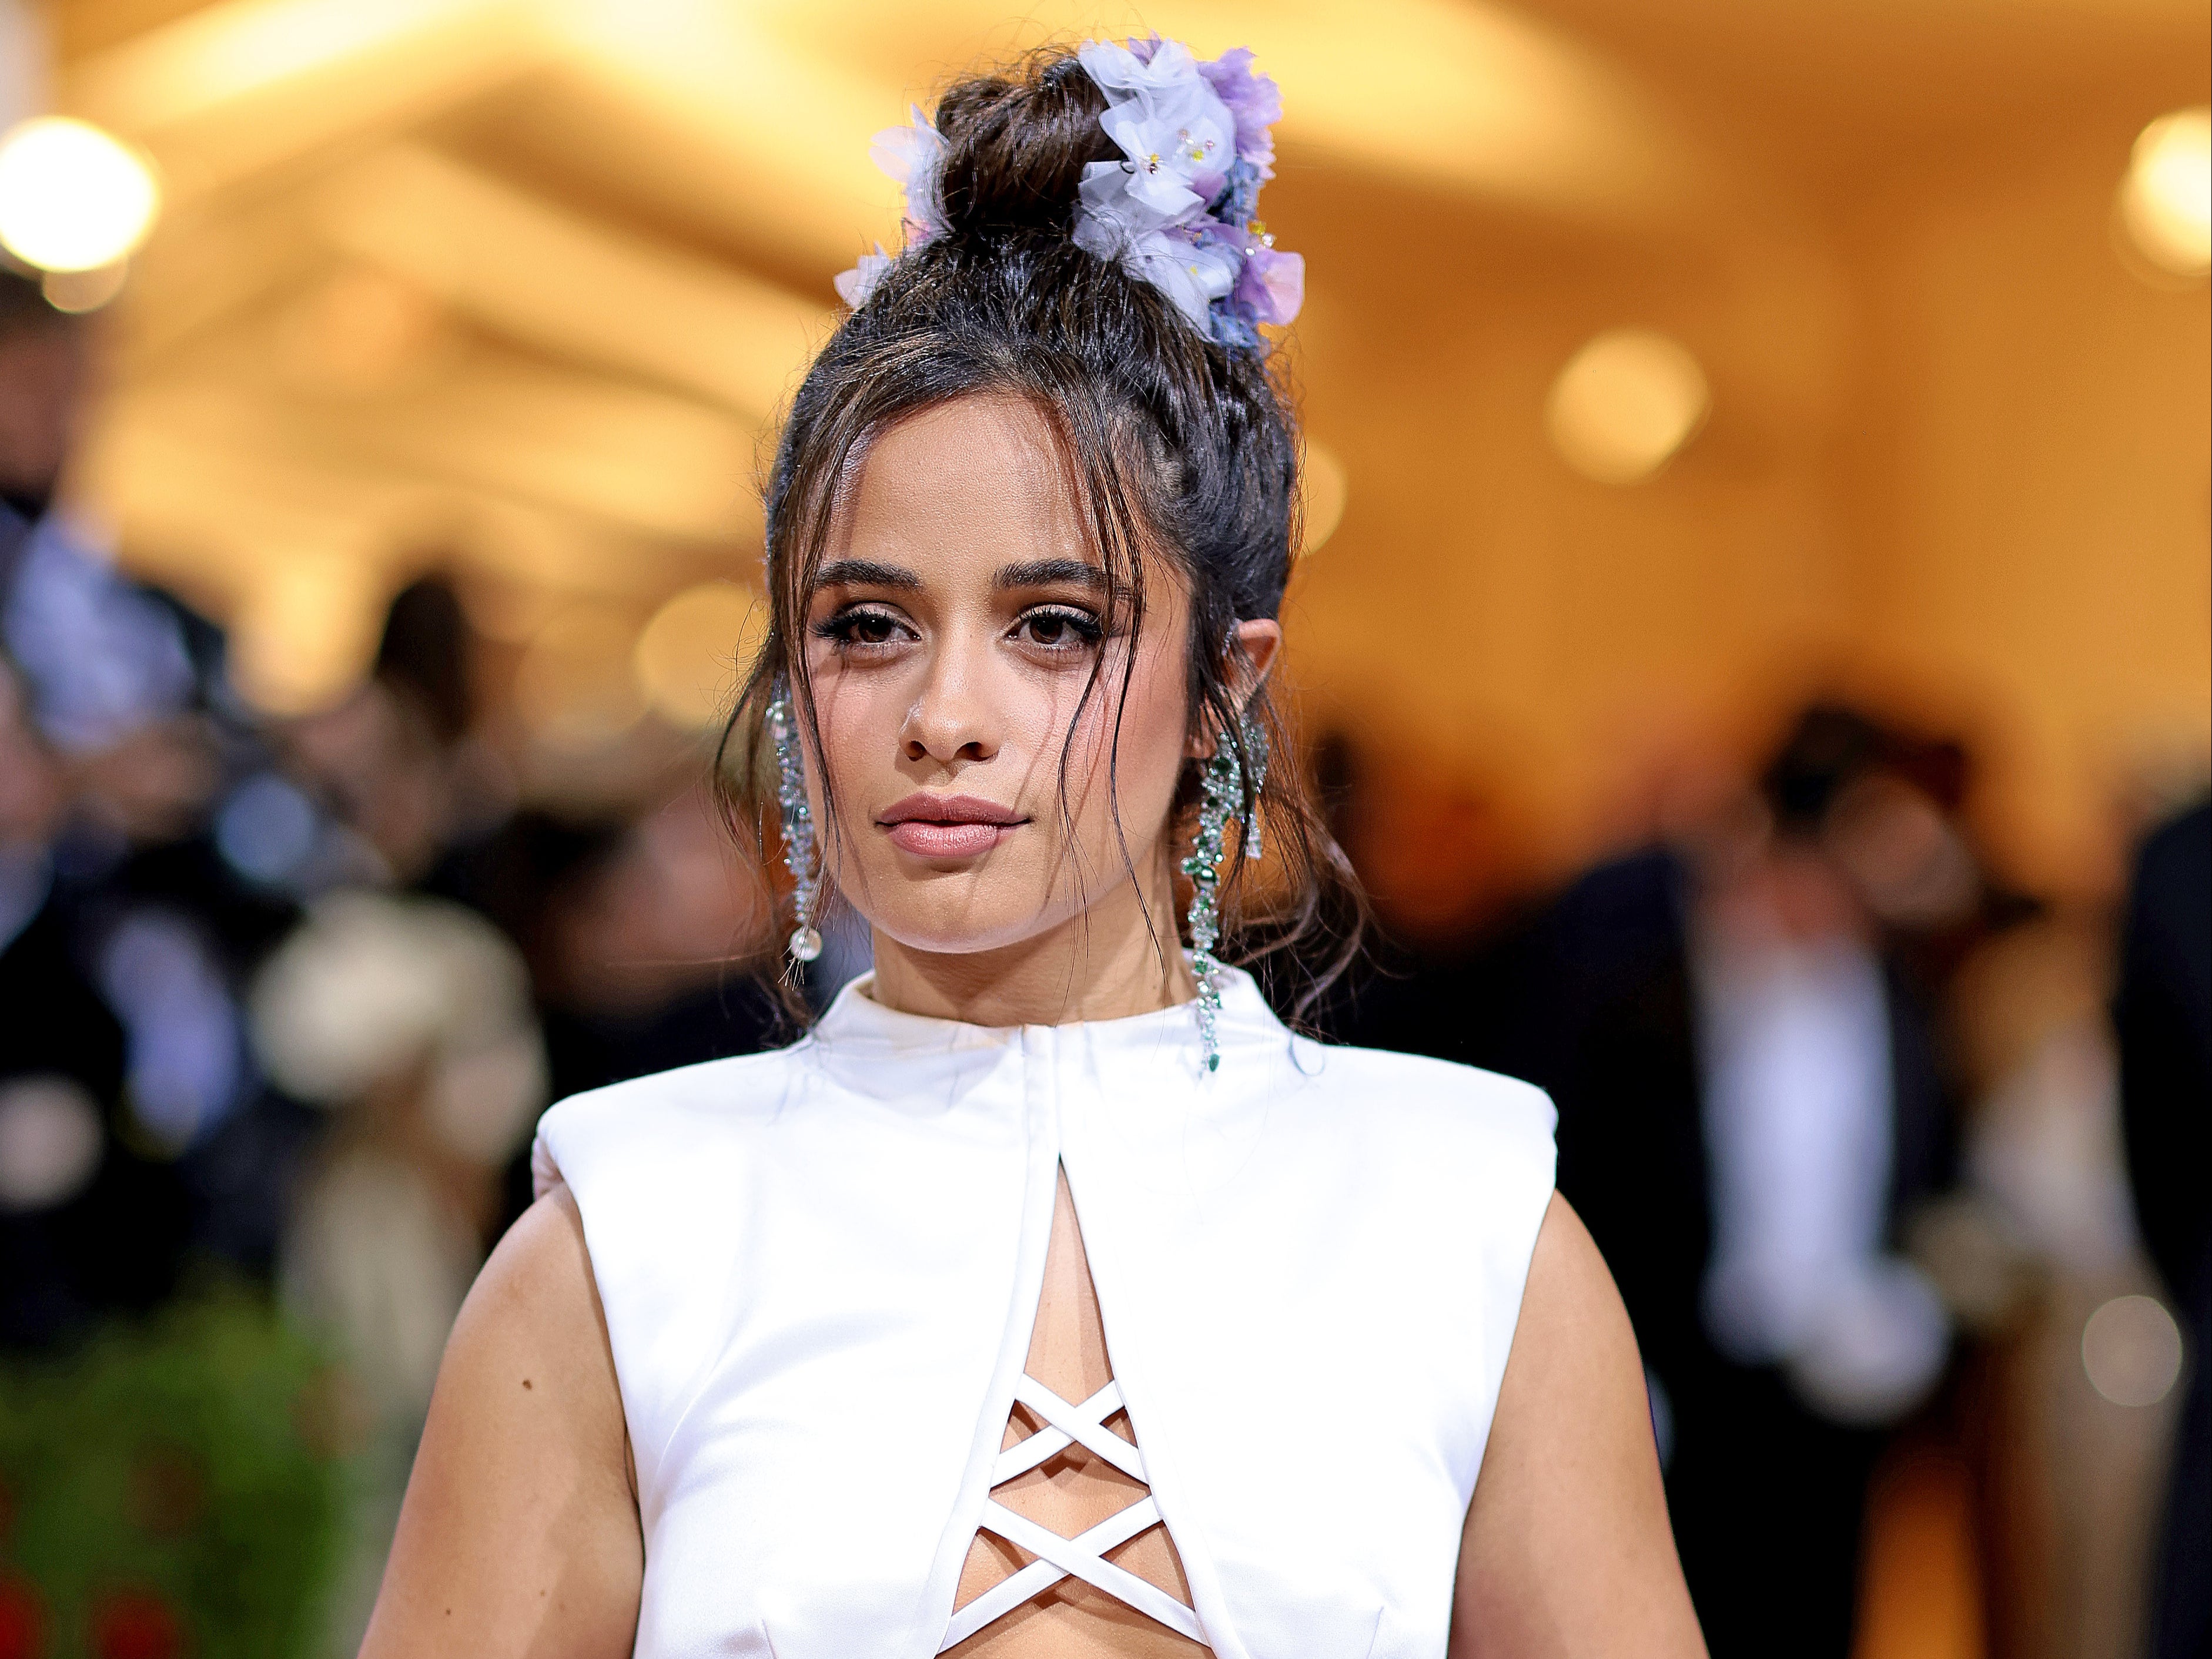 Camila Cabello Opens Up About Struggle With Anxiety Says It Feels Like A ‘bad Trip The